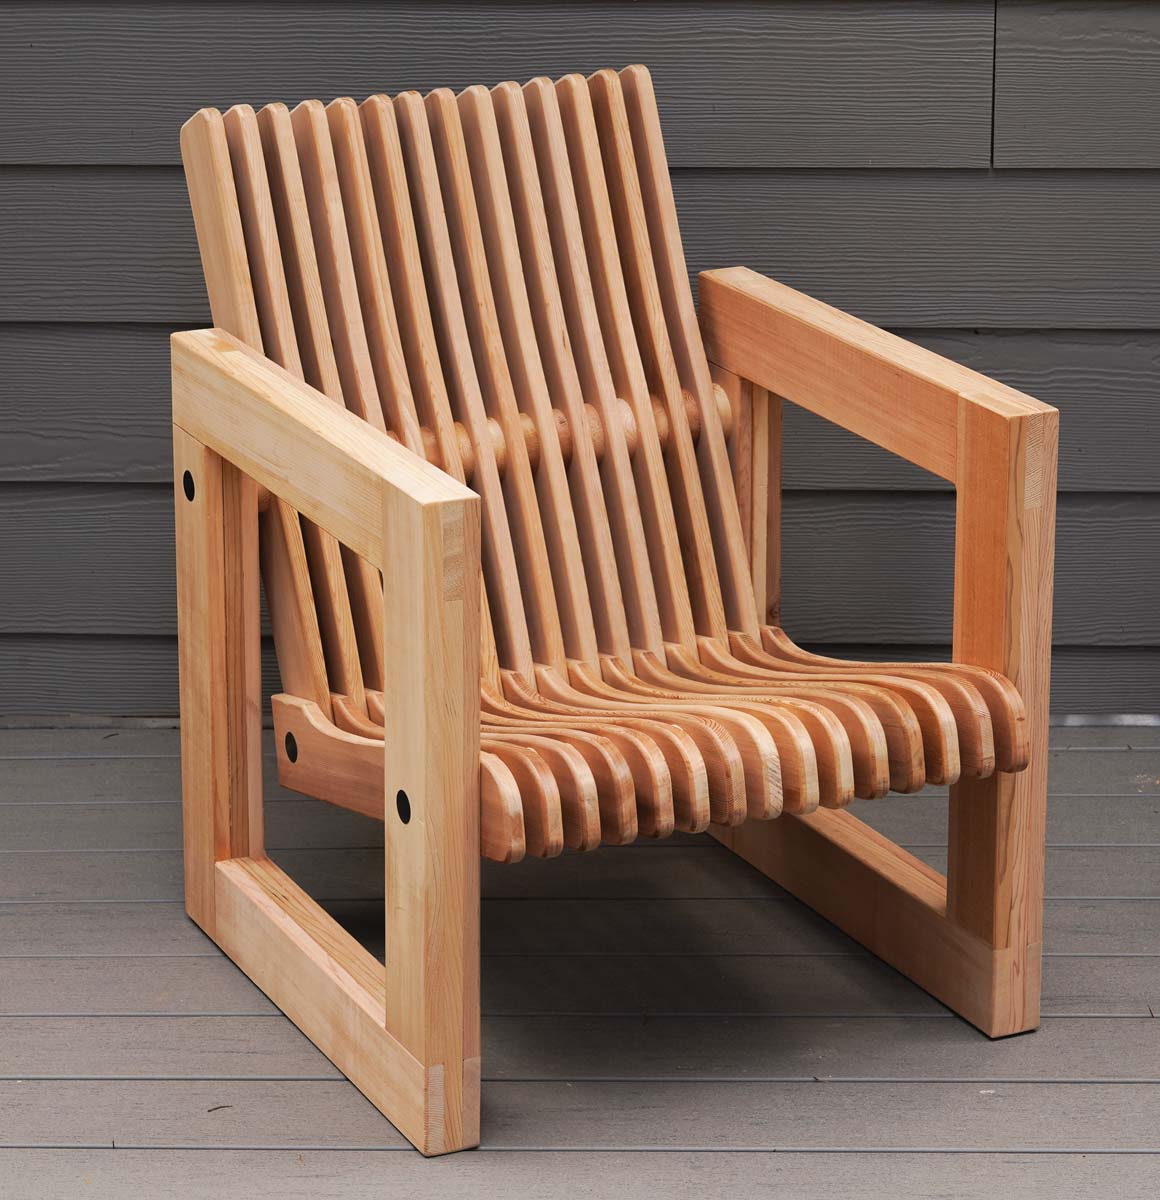 Form-fitting outdoor chair – FineWoodworking